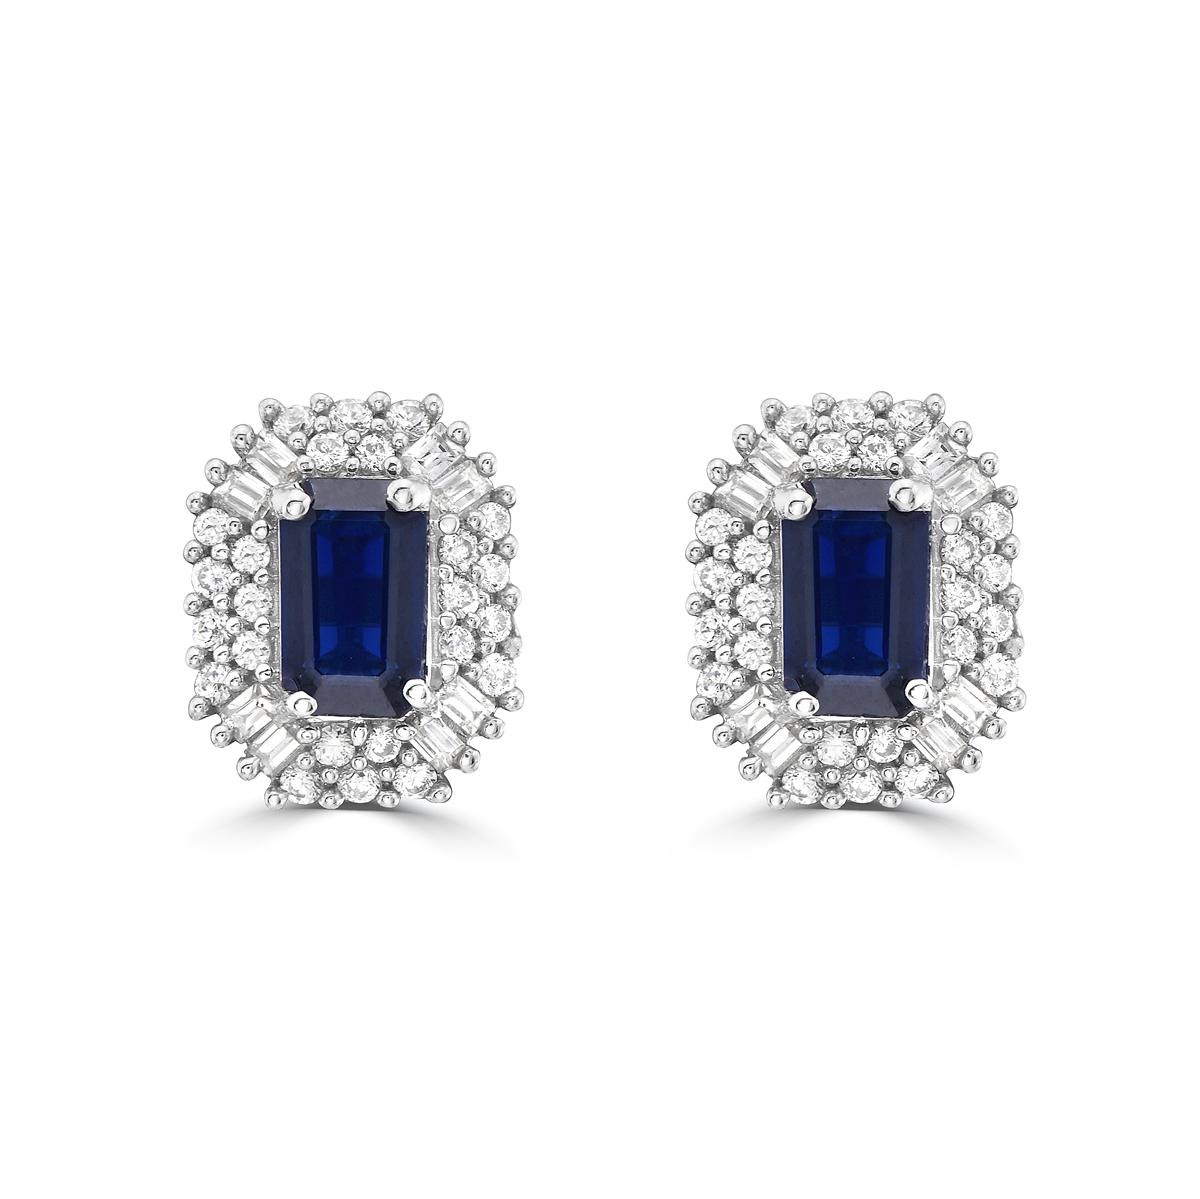 Indulge in luxury with our Blue Sapphire and Diamond Double Halo Stud Earrings. Featuring stunning baguette-cut sapphires, these sapphire stud earrings exude sophistication and exclusivity. The dazzling double halo design with accompanying diamonds